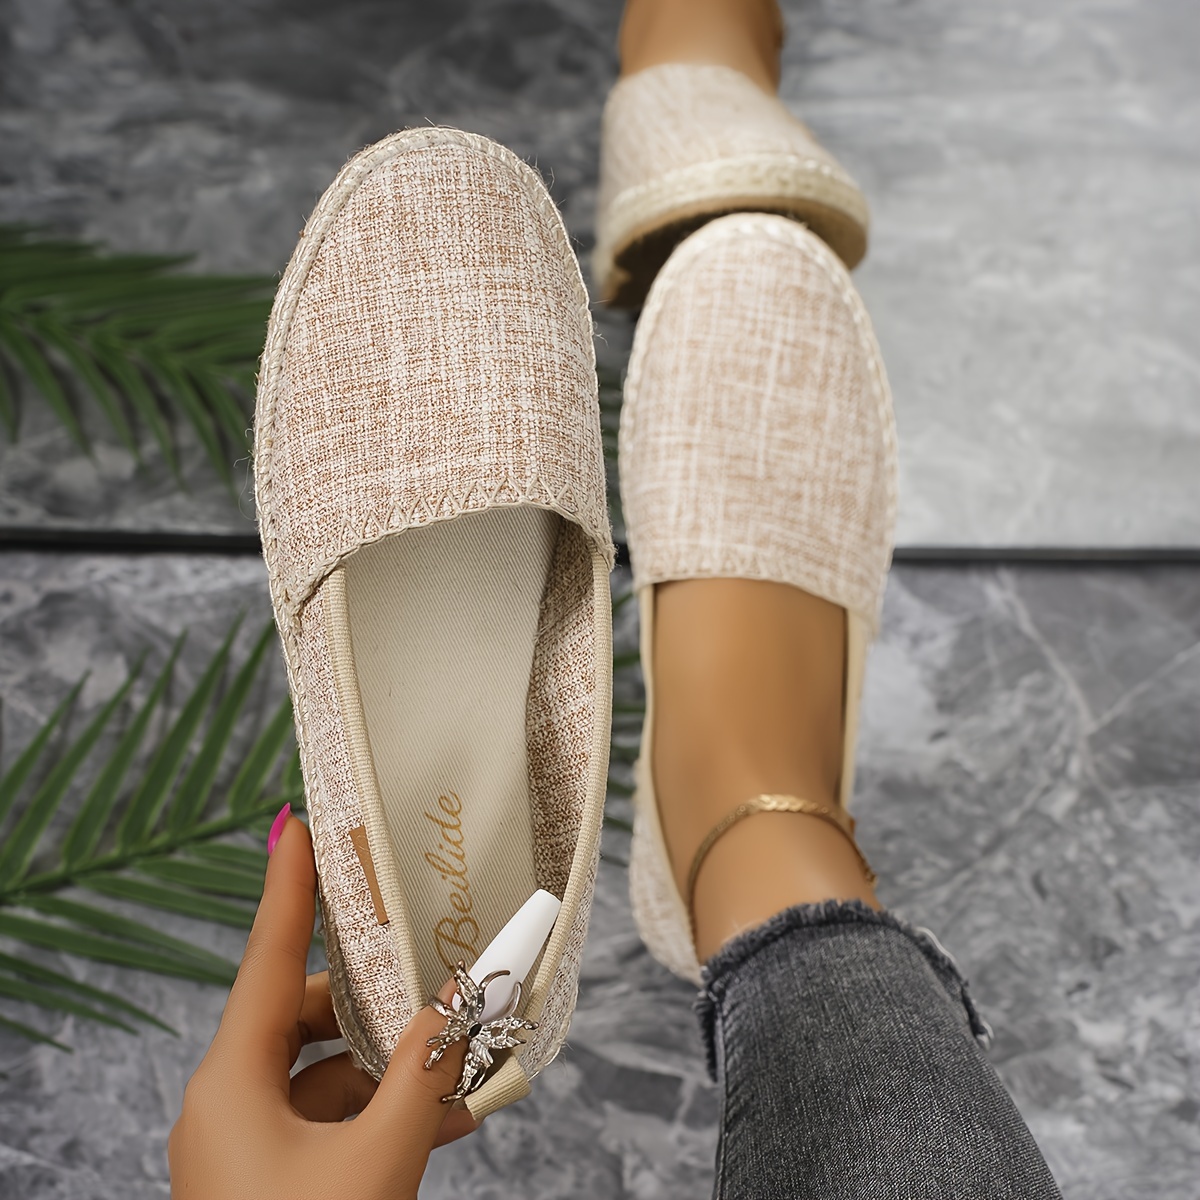 

Women's Casual Loafers, Slip-on Espadrille Flats, Lightweight & Breathable Round Toe Shoes